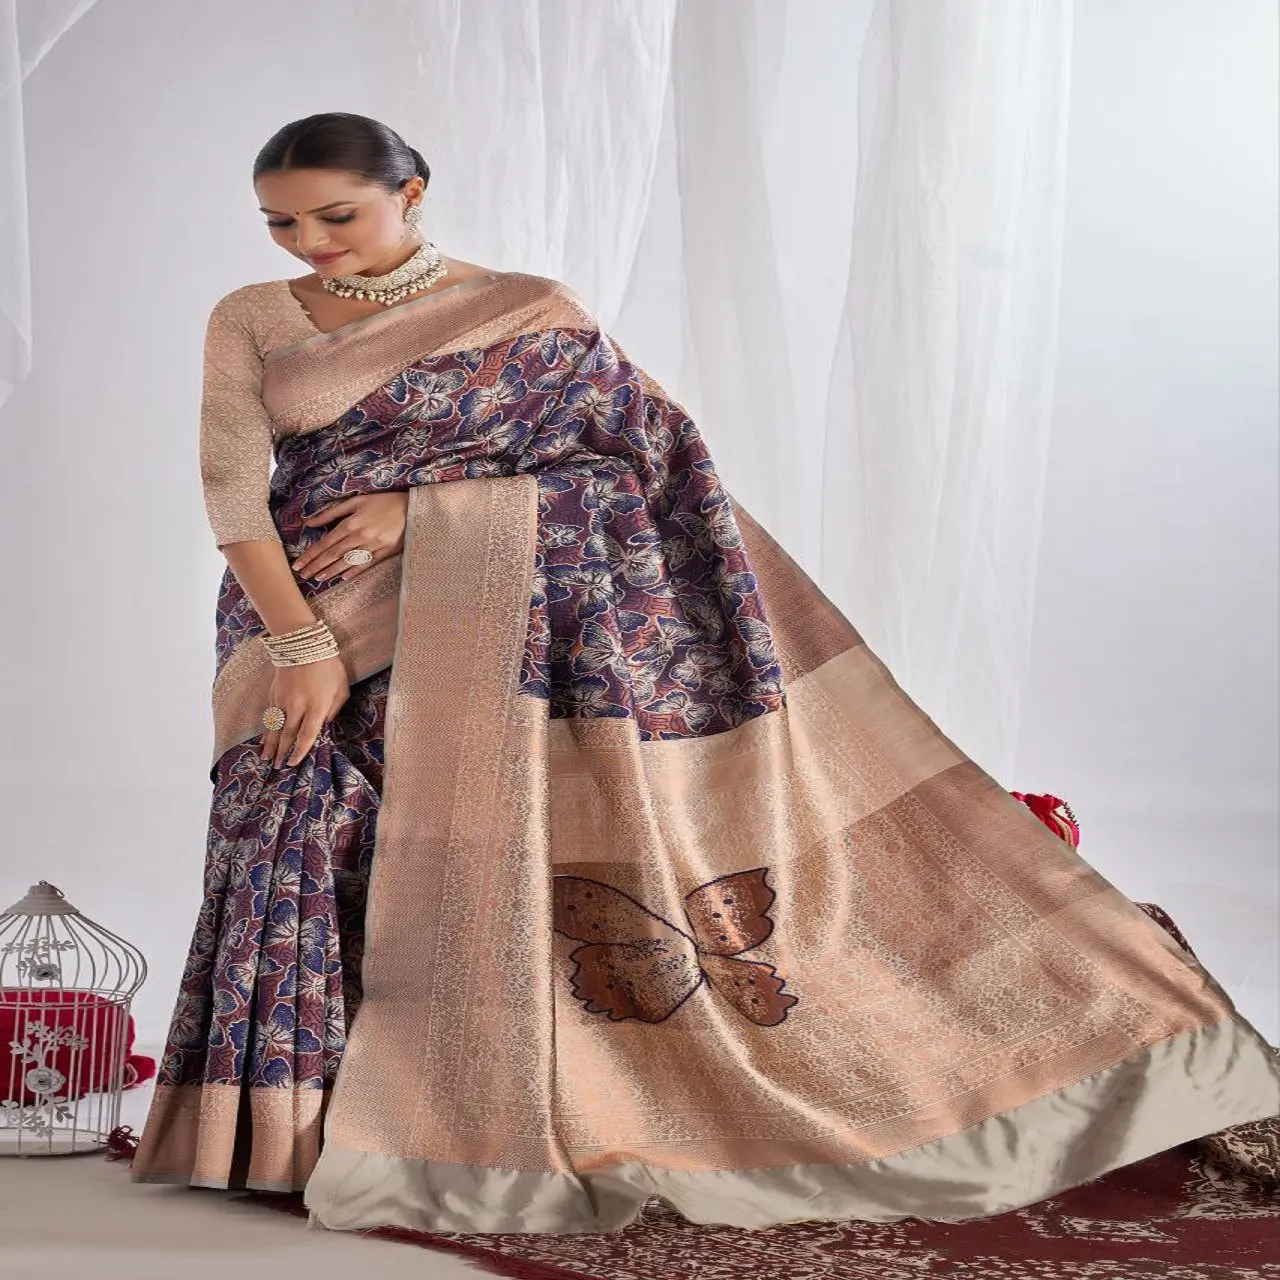 Exquisite Silk Printed Saree with Unstitched Blouse Indian & Pakistani Clothing Essentials for Every Occasion